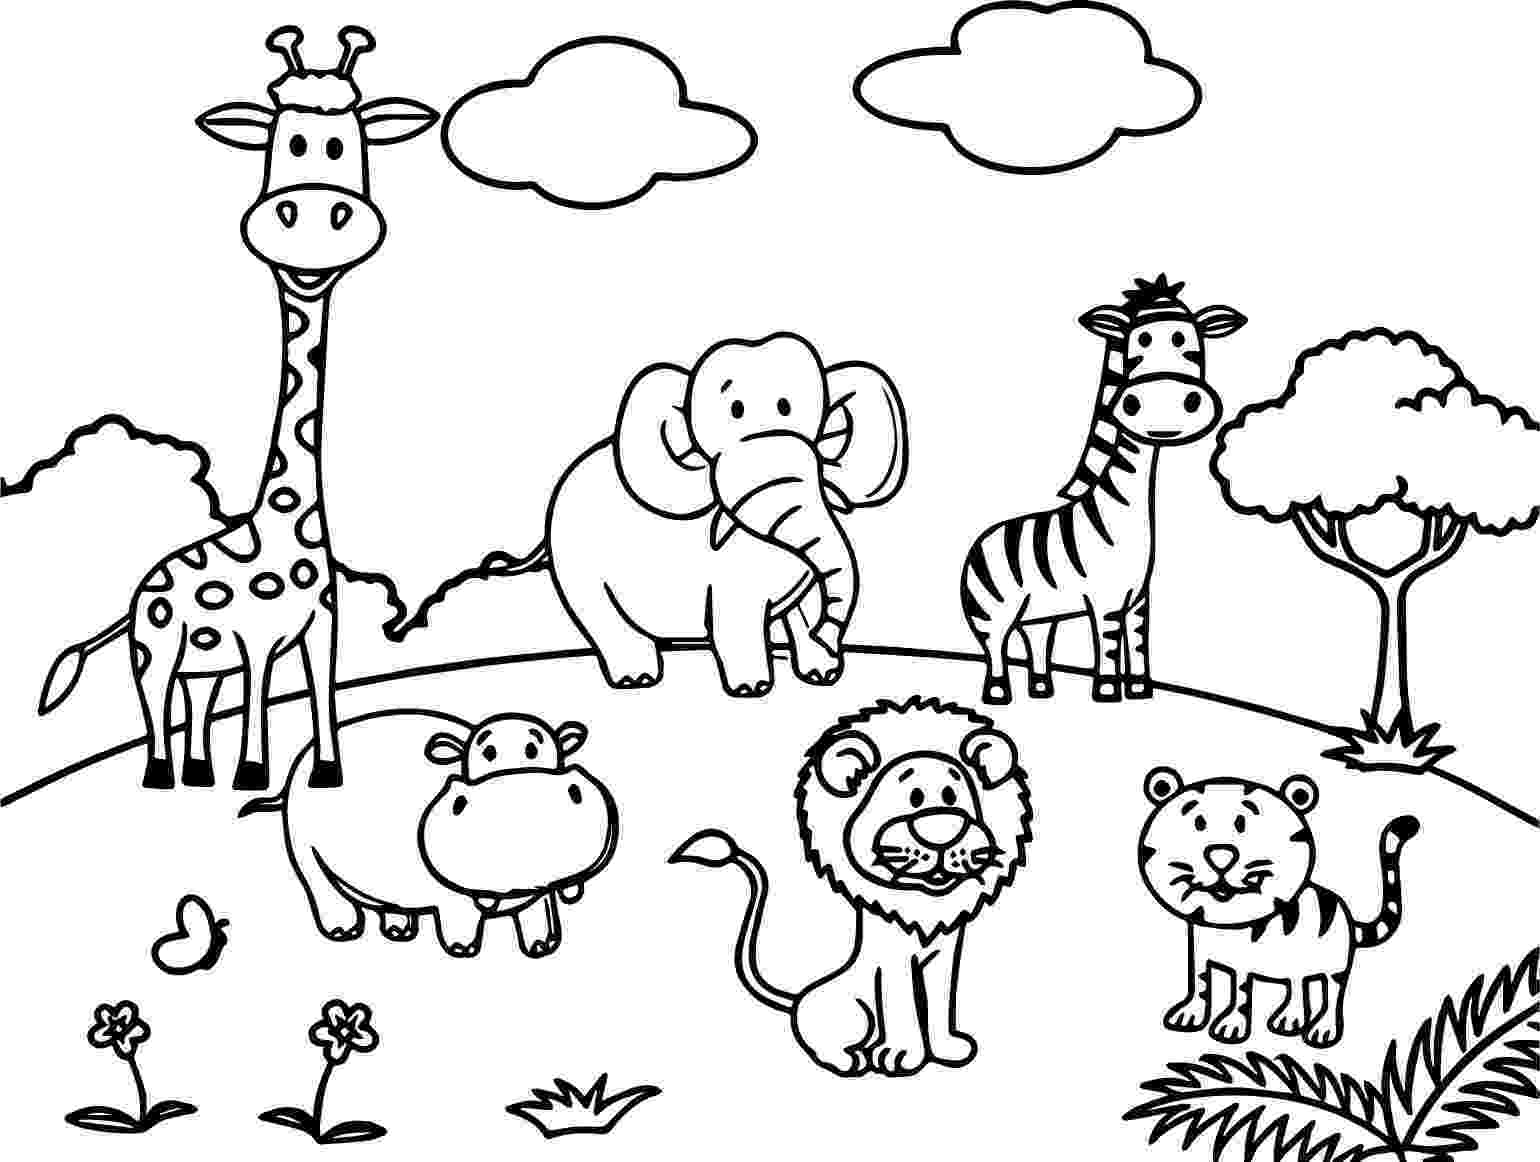 coloring picture zoo zoo colouring in poster by really giant posters coloring picture zoo 